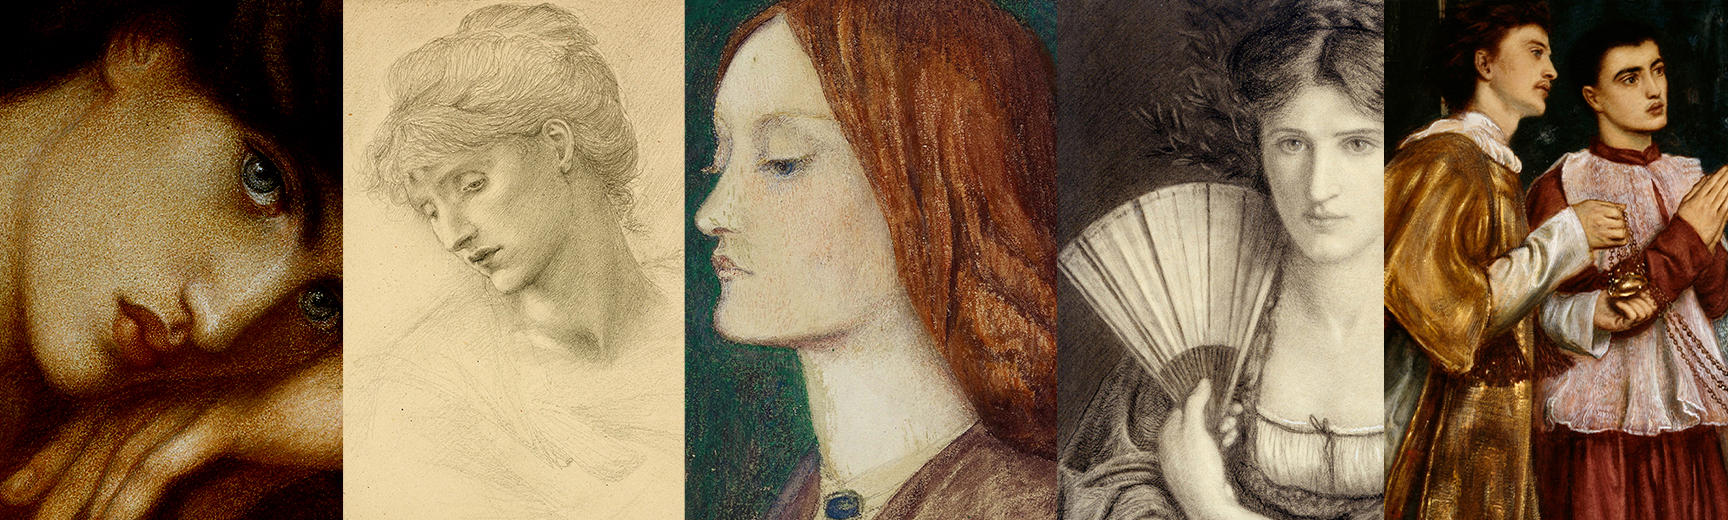 Pre-Raphaelite stunners portraits in a composite image